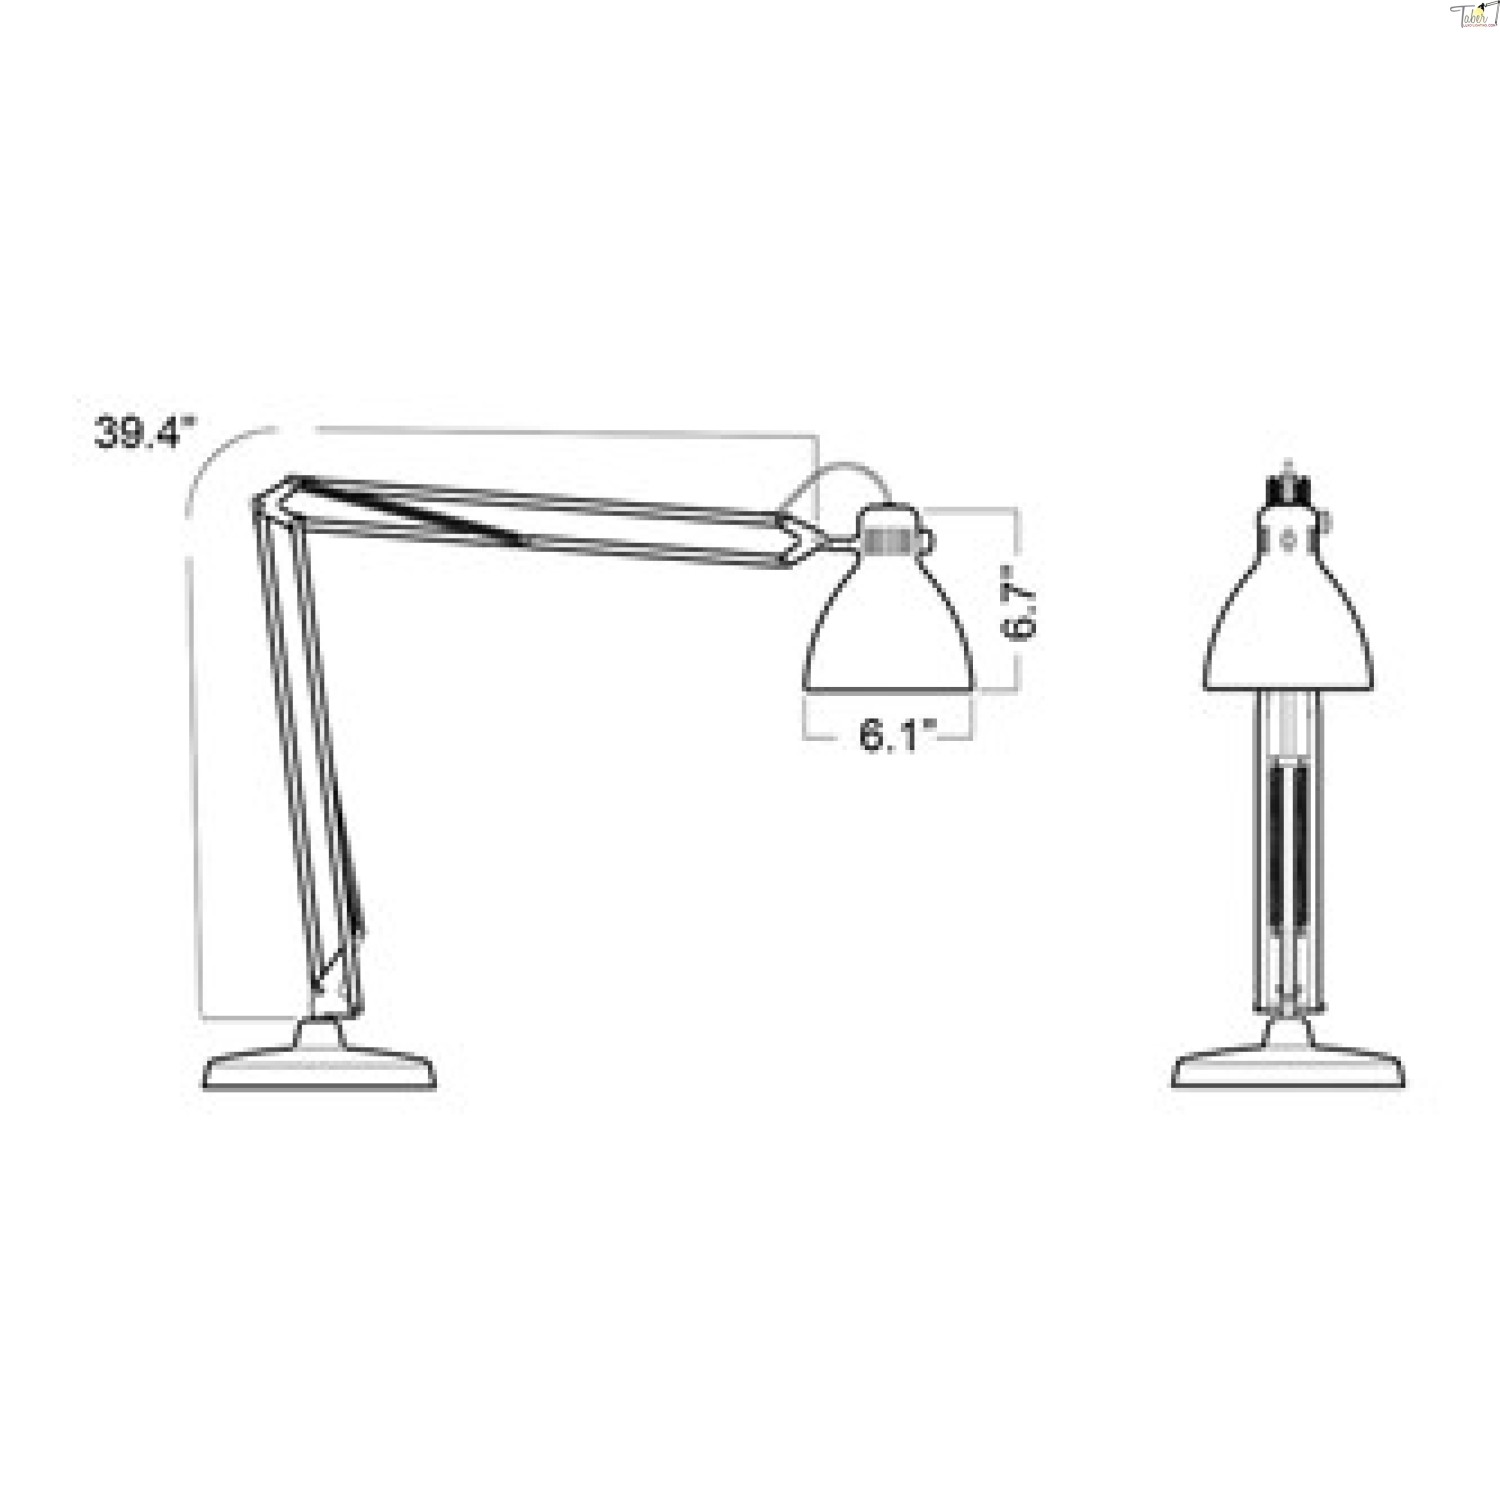 Luxo L 1 Led Task Light With Edge Clamp, Luxo Lamp Table Clamp